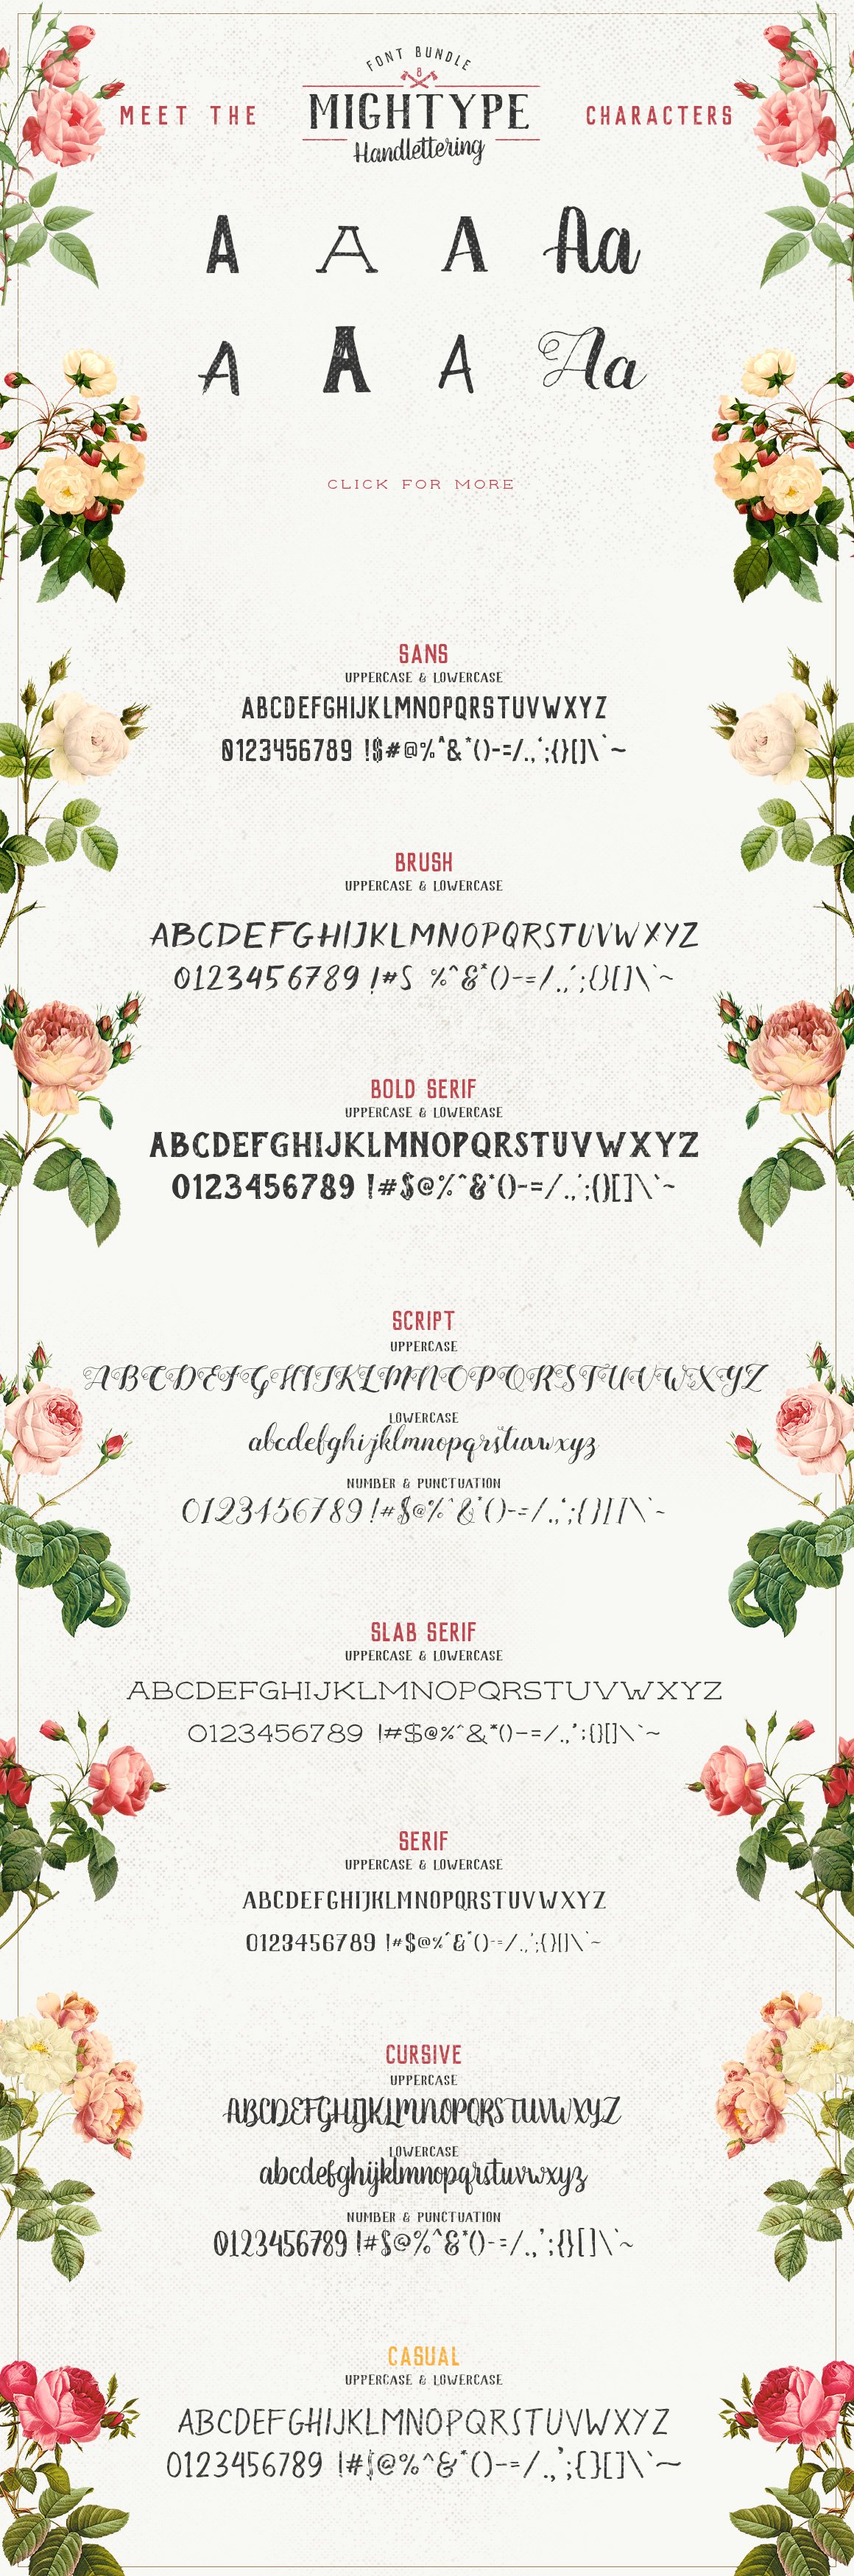 Mightype FontPack Handlettering preview image.